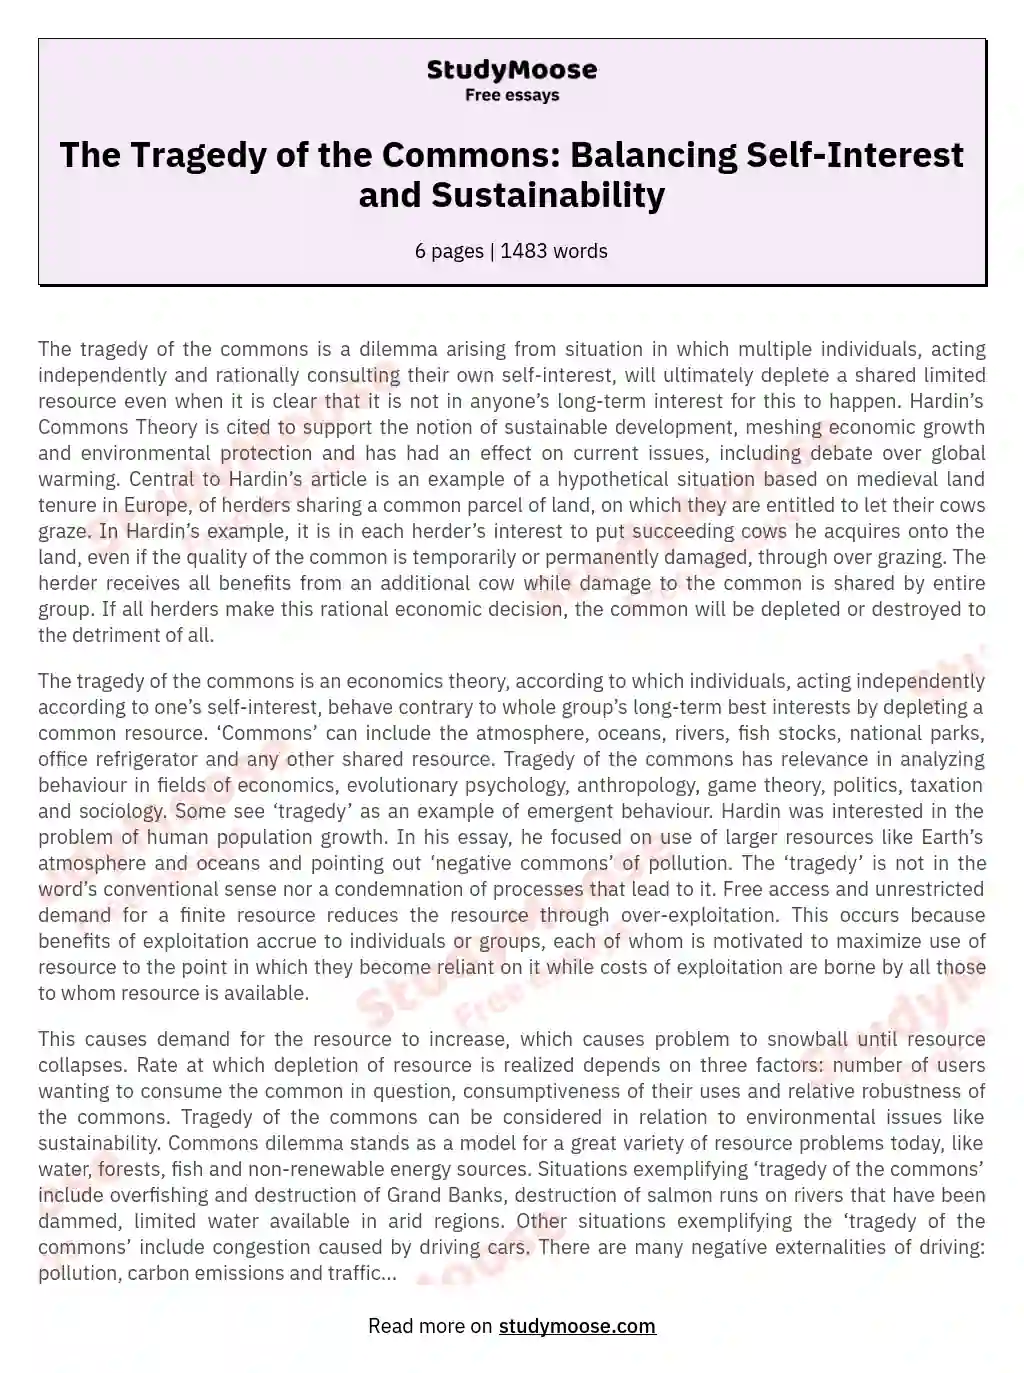 The Tragedy of the Commons: Balancing Self-Interest and Sustainability essay